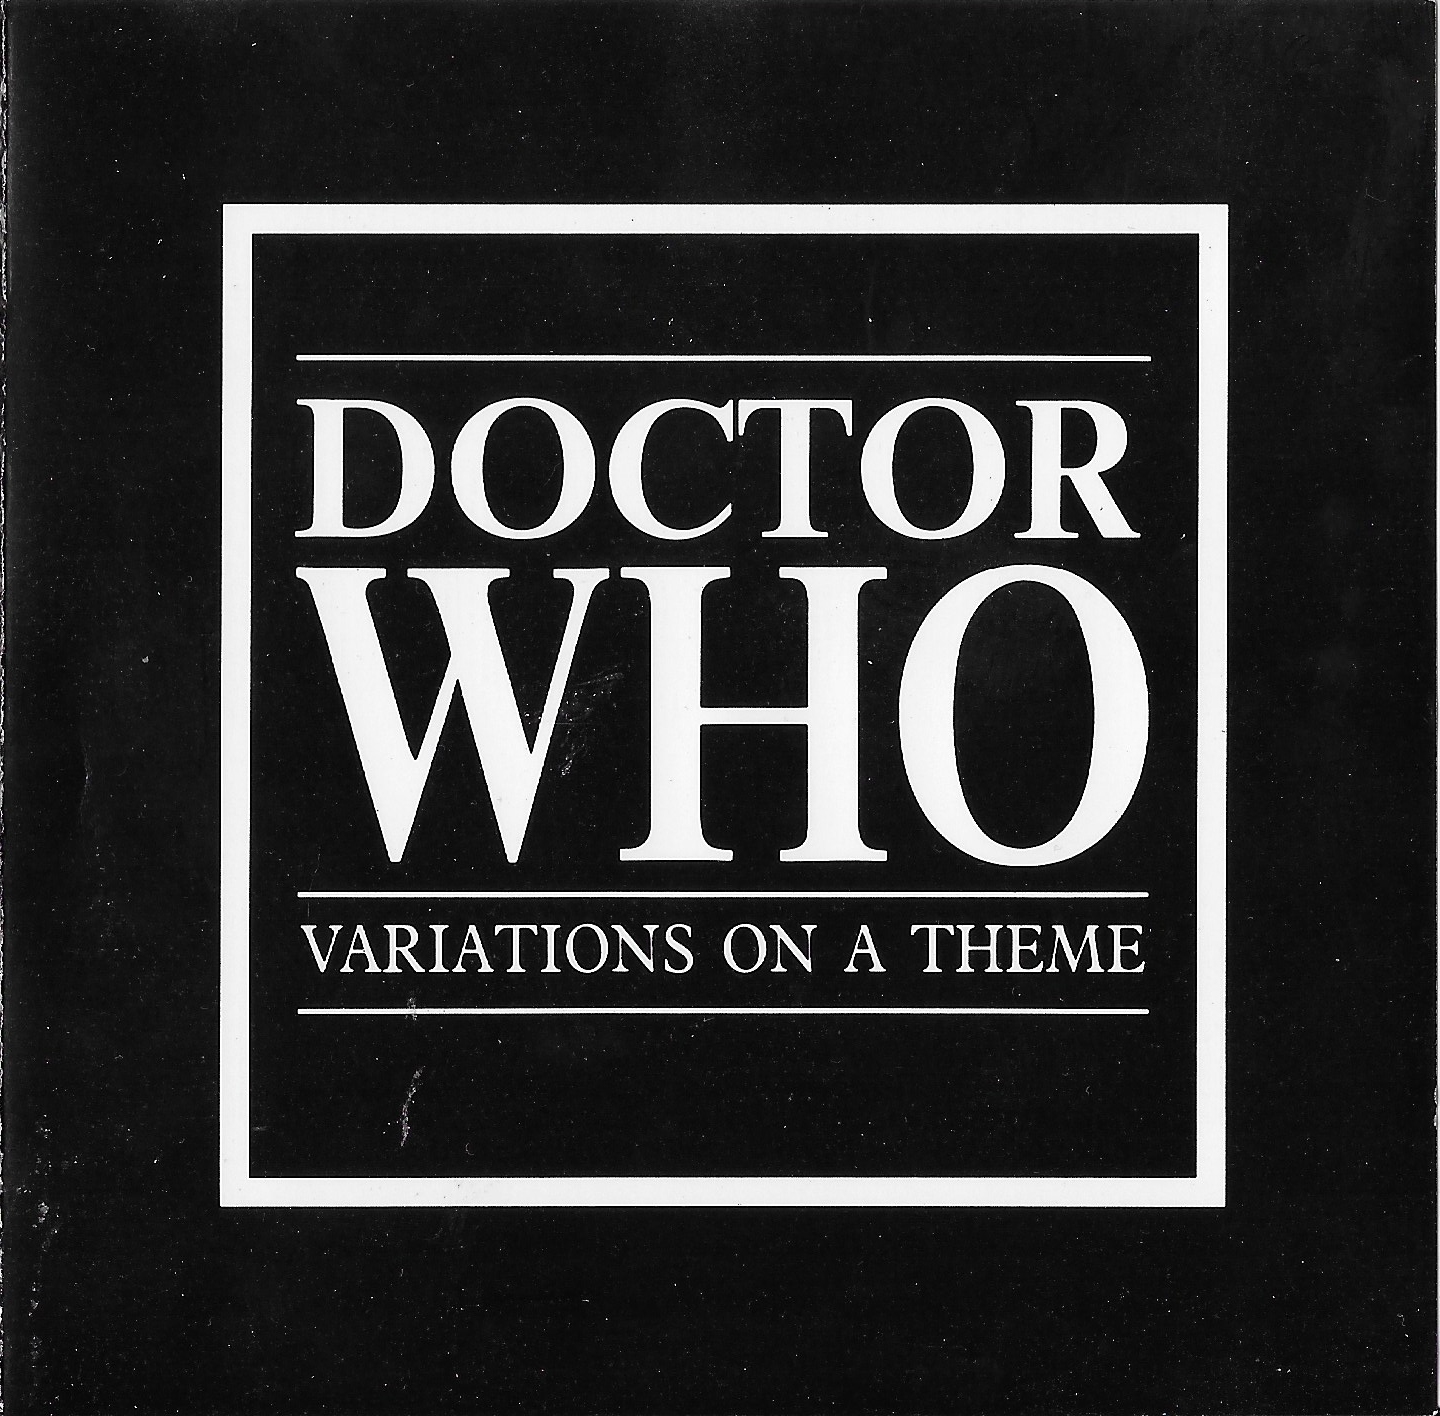 Picture of CD MMI - 4 Doctor Who - Variations on a theme by artist Ron Grainer from the BBC cdsingles - Records and Tapes library